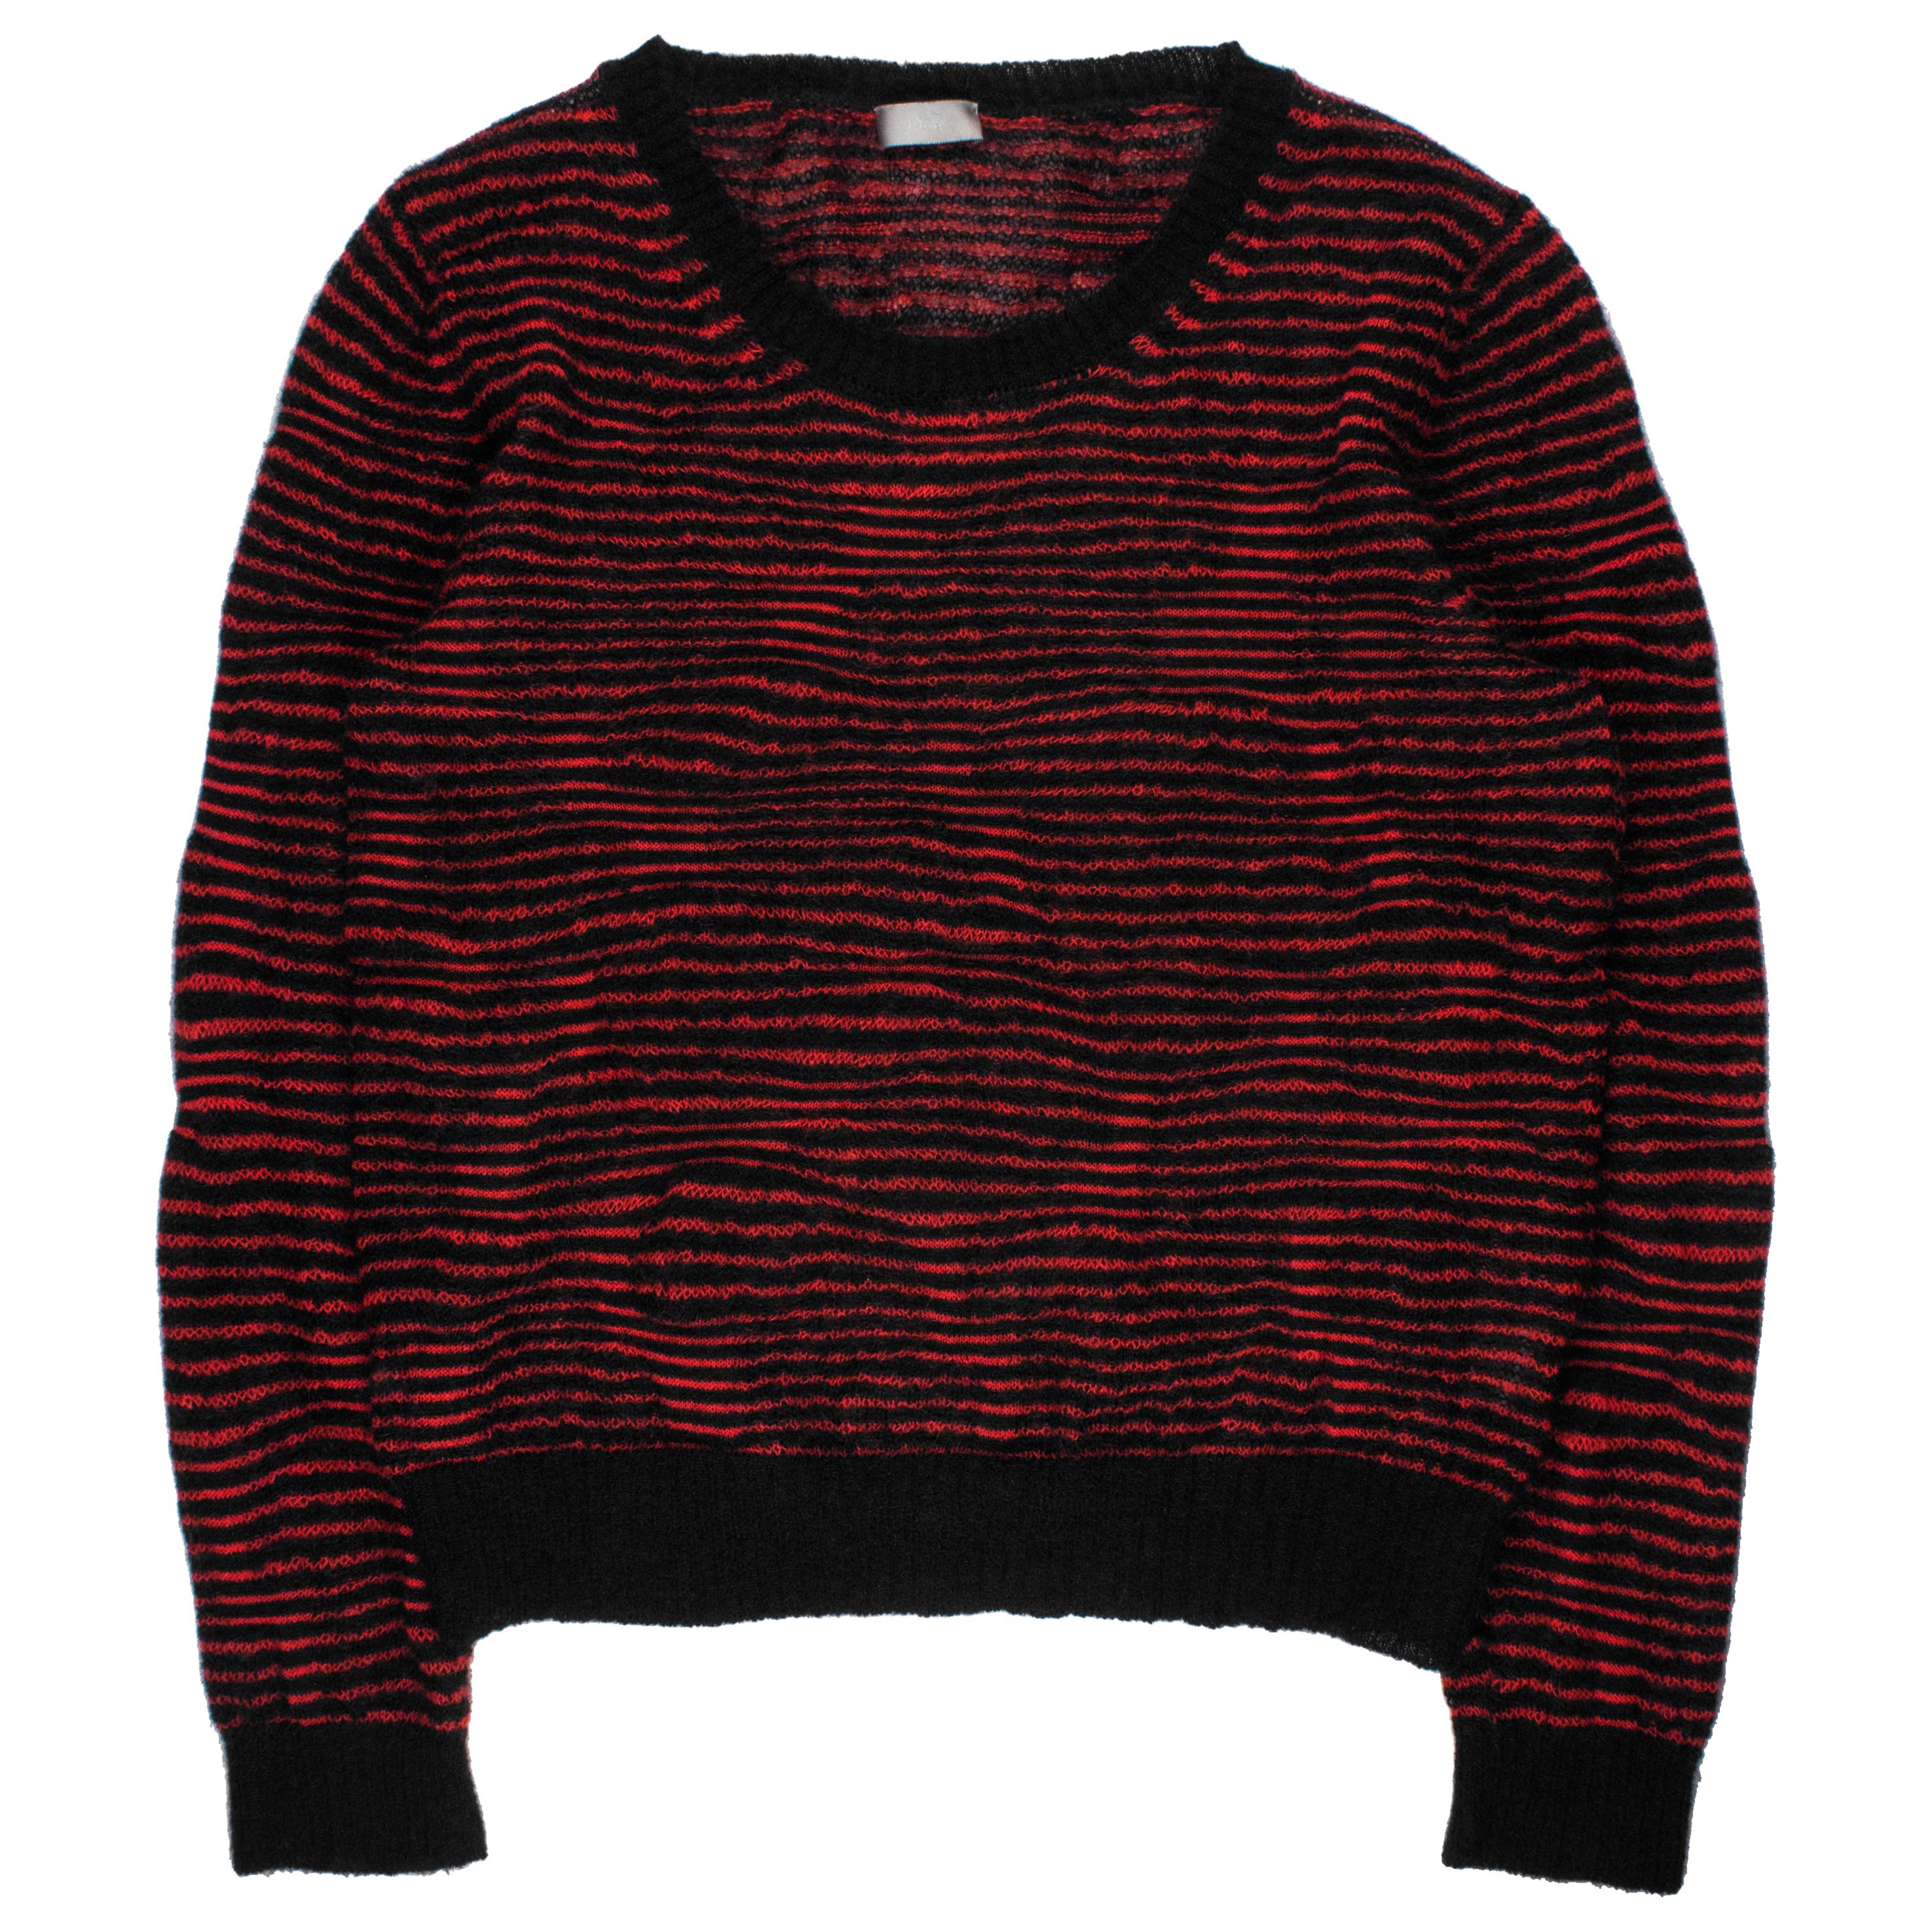 Dior Homme AW2007 "Navigate" Striped Mohair Sweater